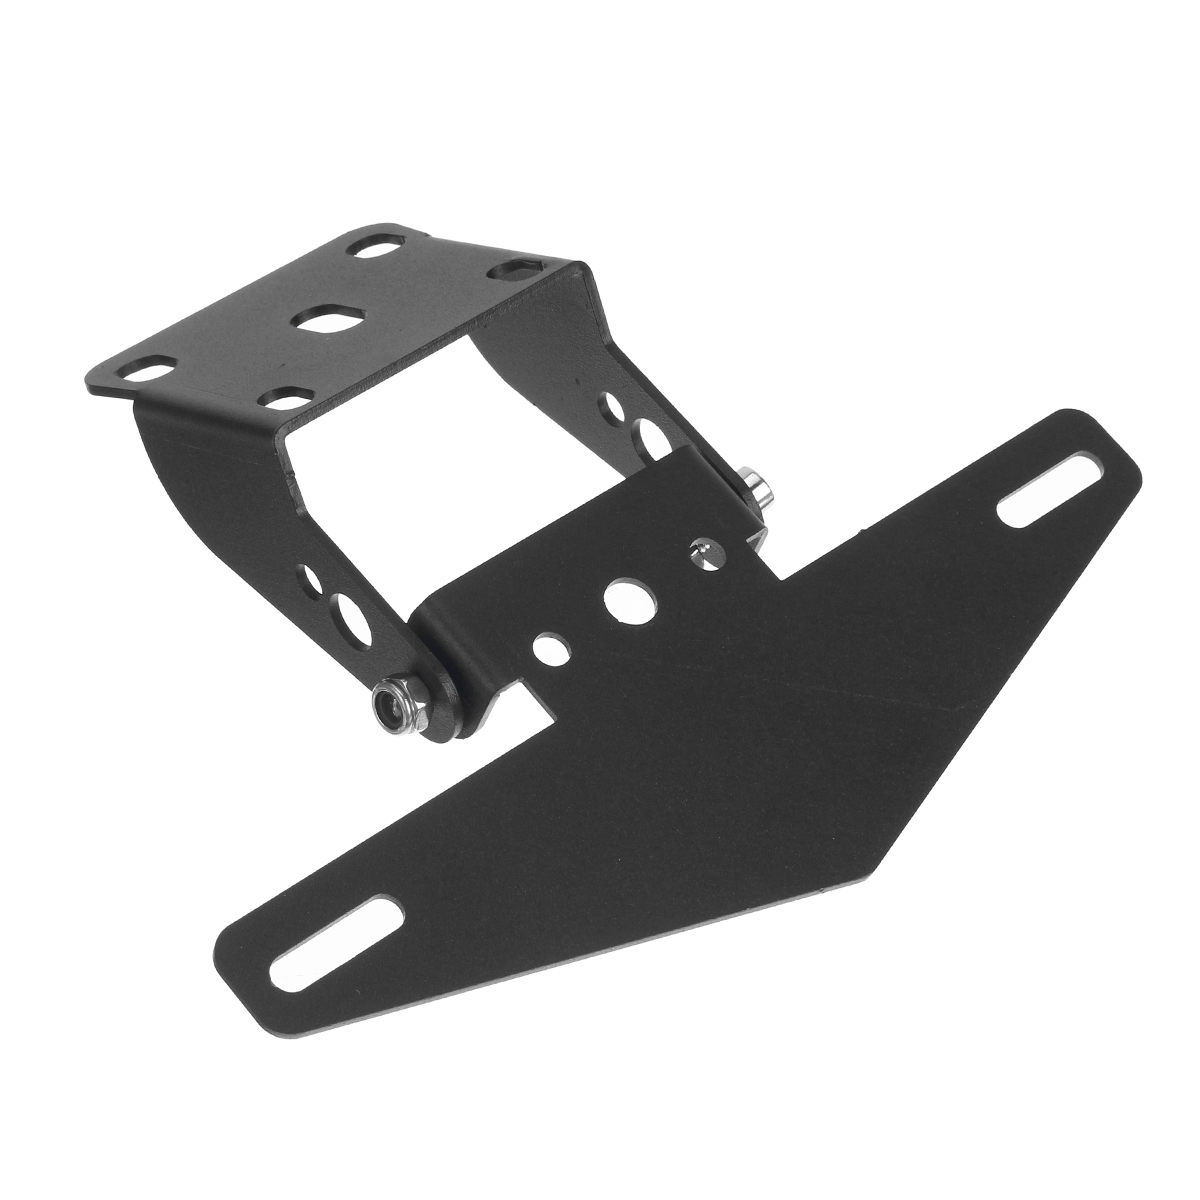 Motorcycle Rear License Plate Tail Frame Holder Bracket with LED Light for 125 250 390 200 2013-2019